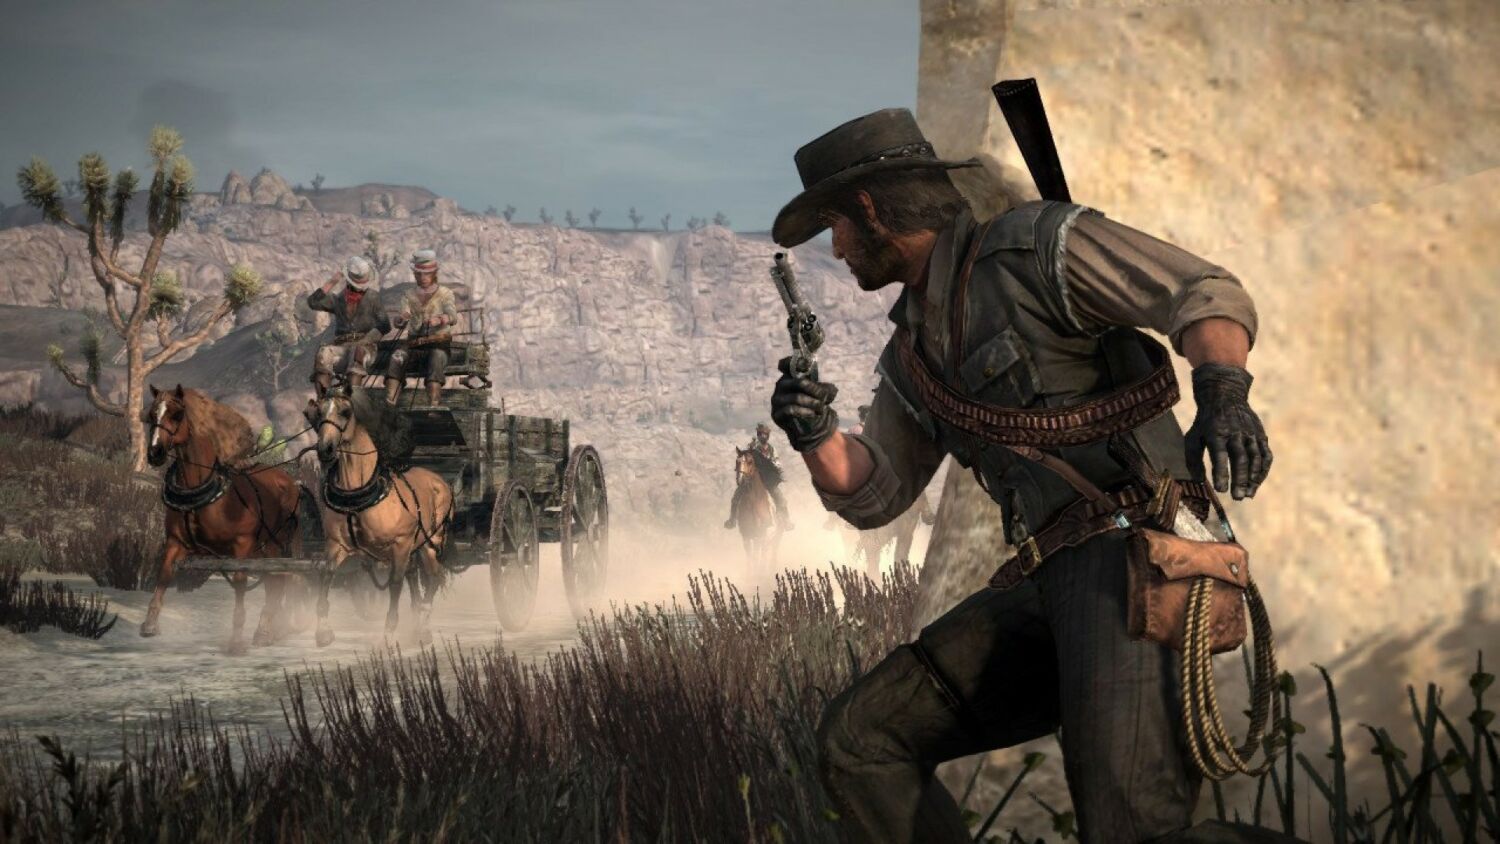 Red Dead Redemption PS4 and Nintendo Switch physical copy revealed